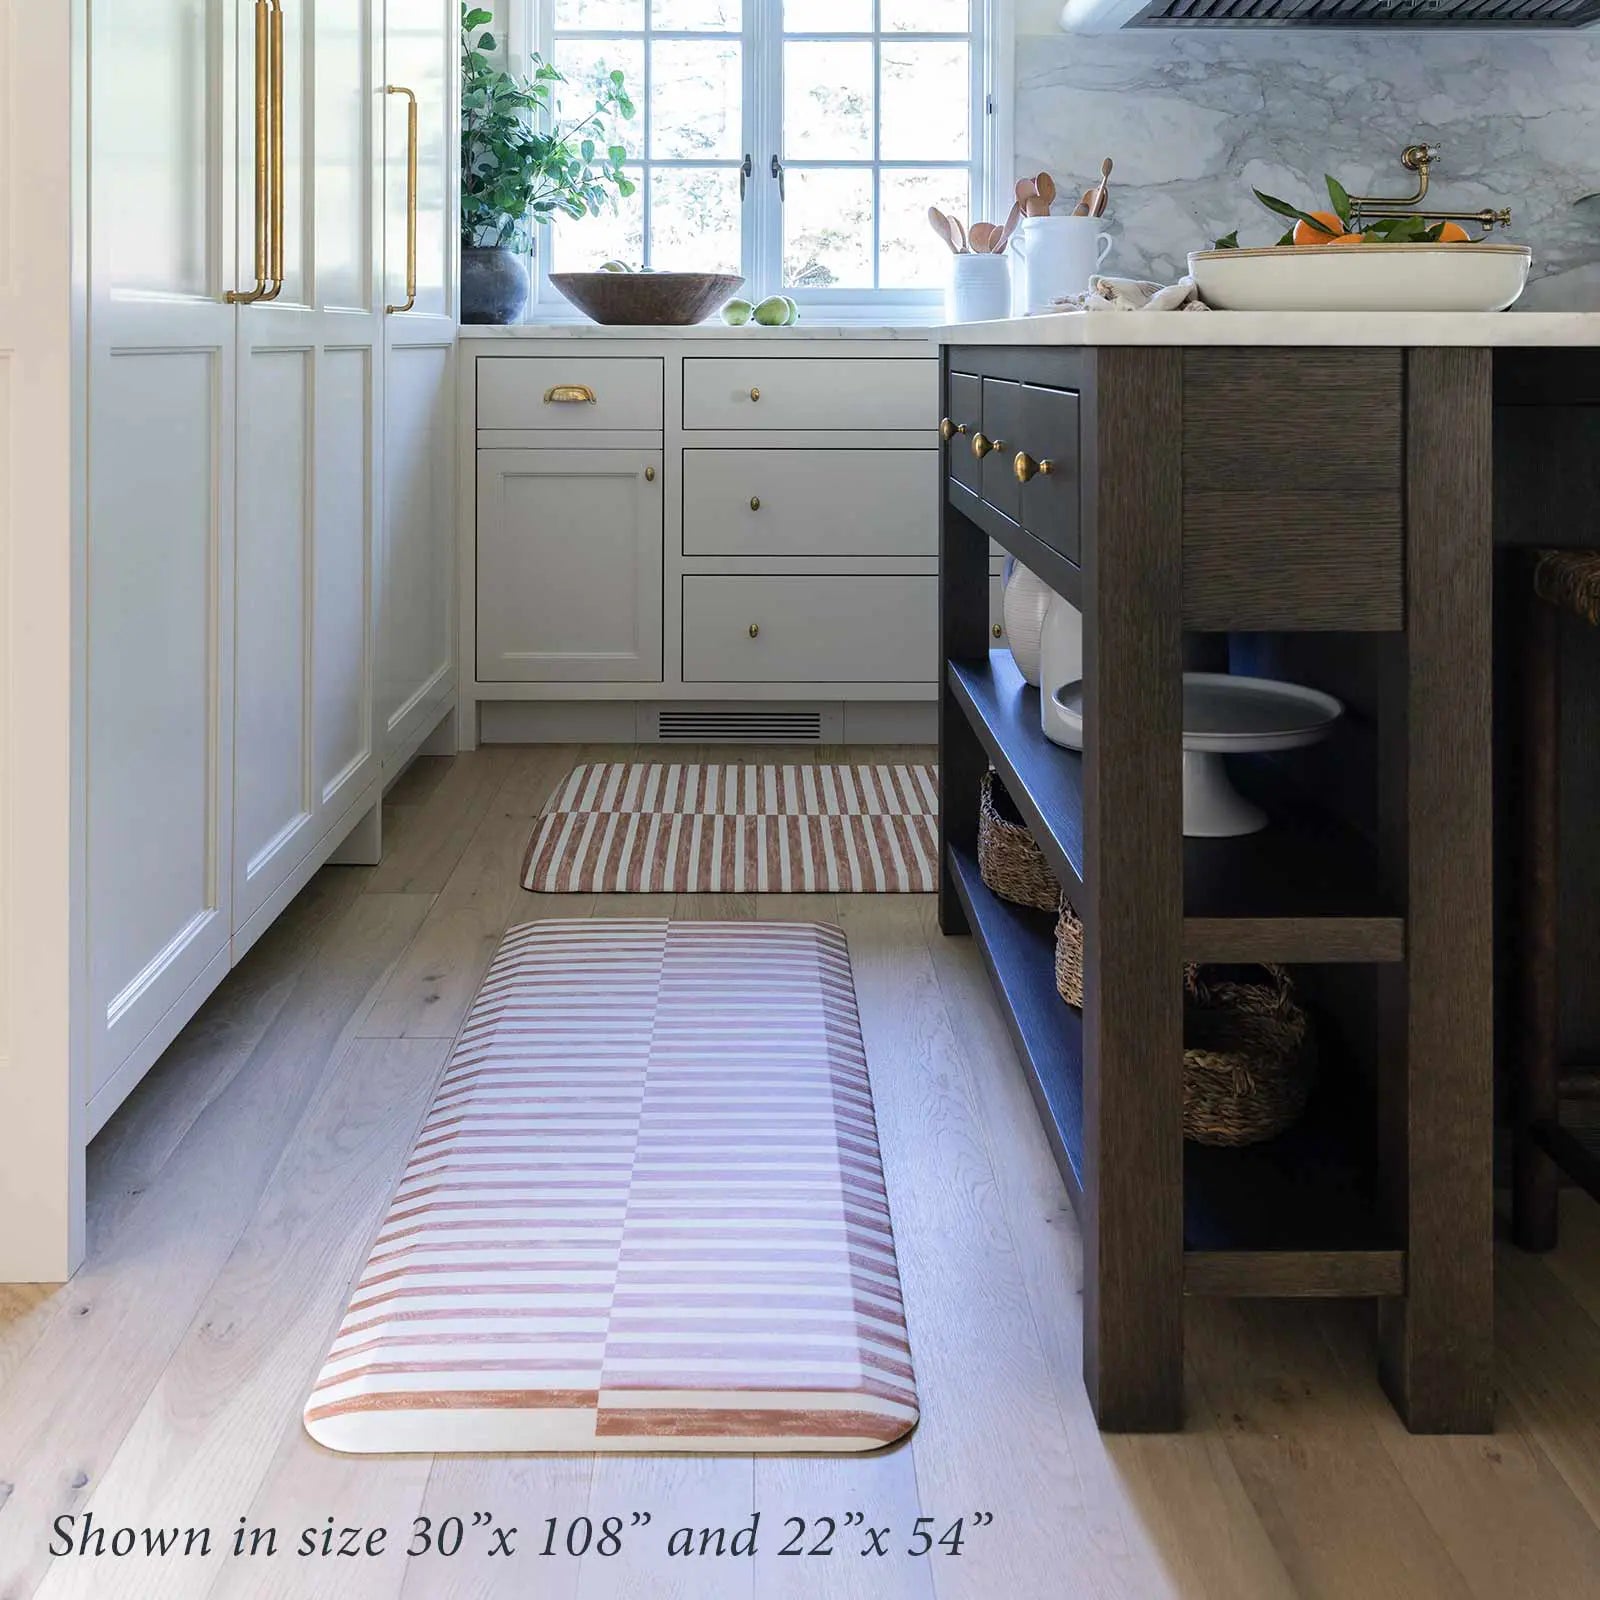 Reese terracotta brown and white inverted stripe standing mat shown in kitchen in sizes 22x54 and 30x108